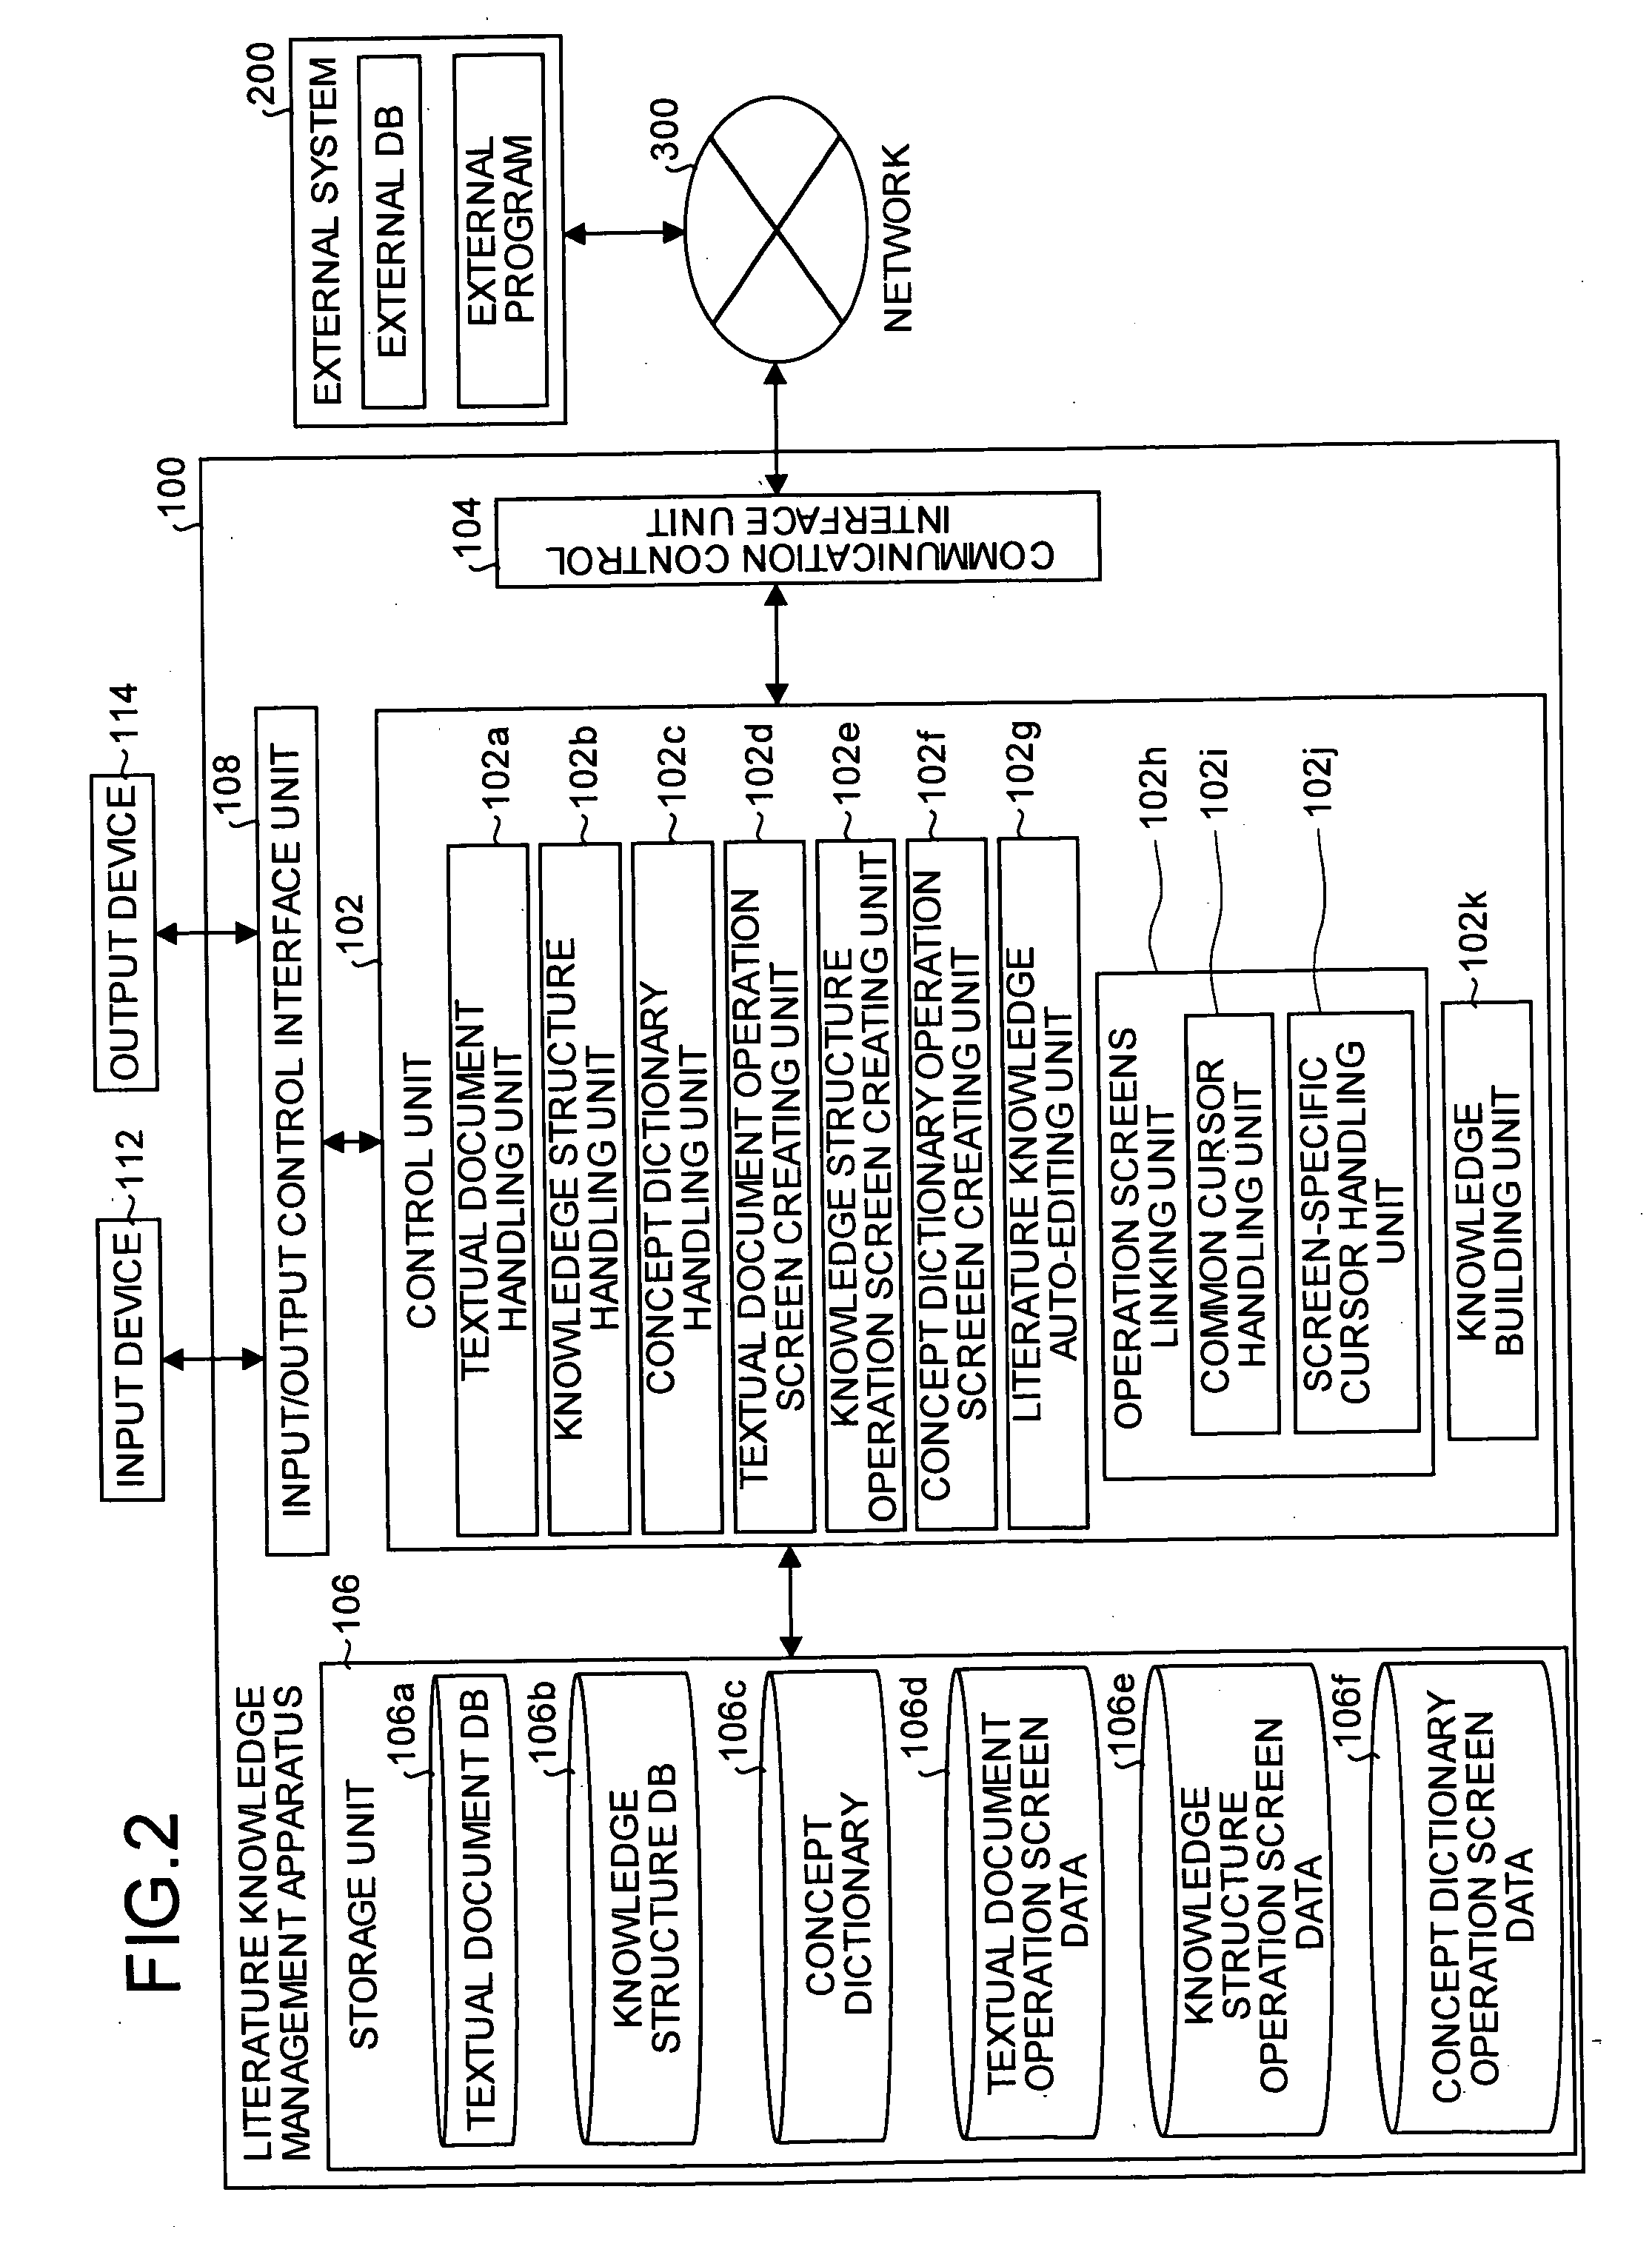 Document knowledge management apparatus and method